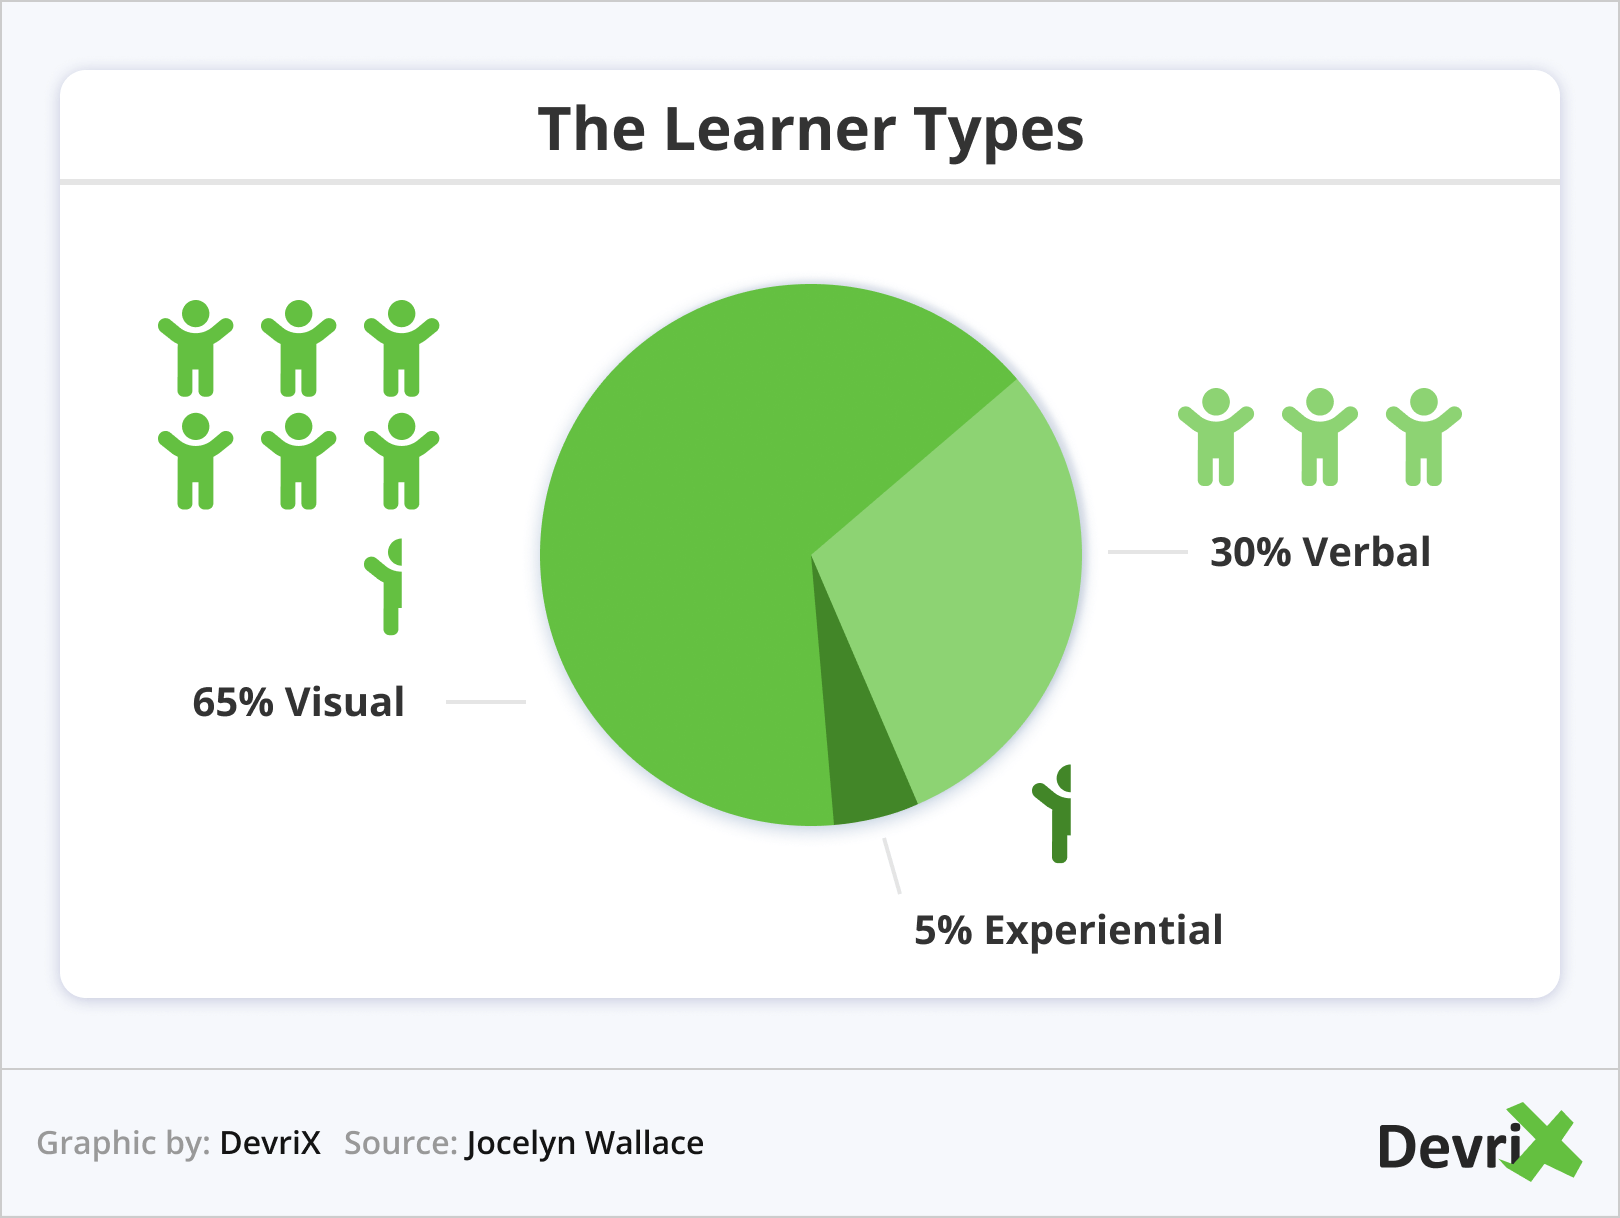 The Learner Types